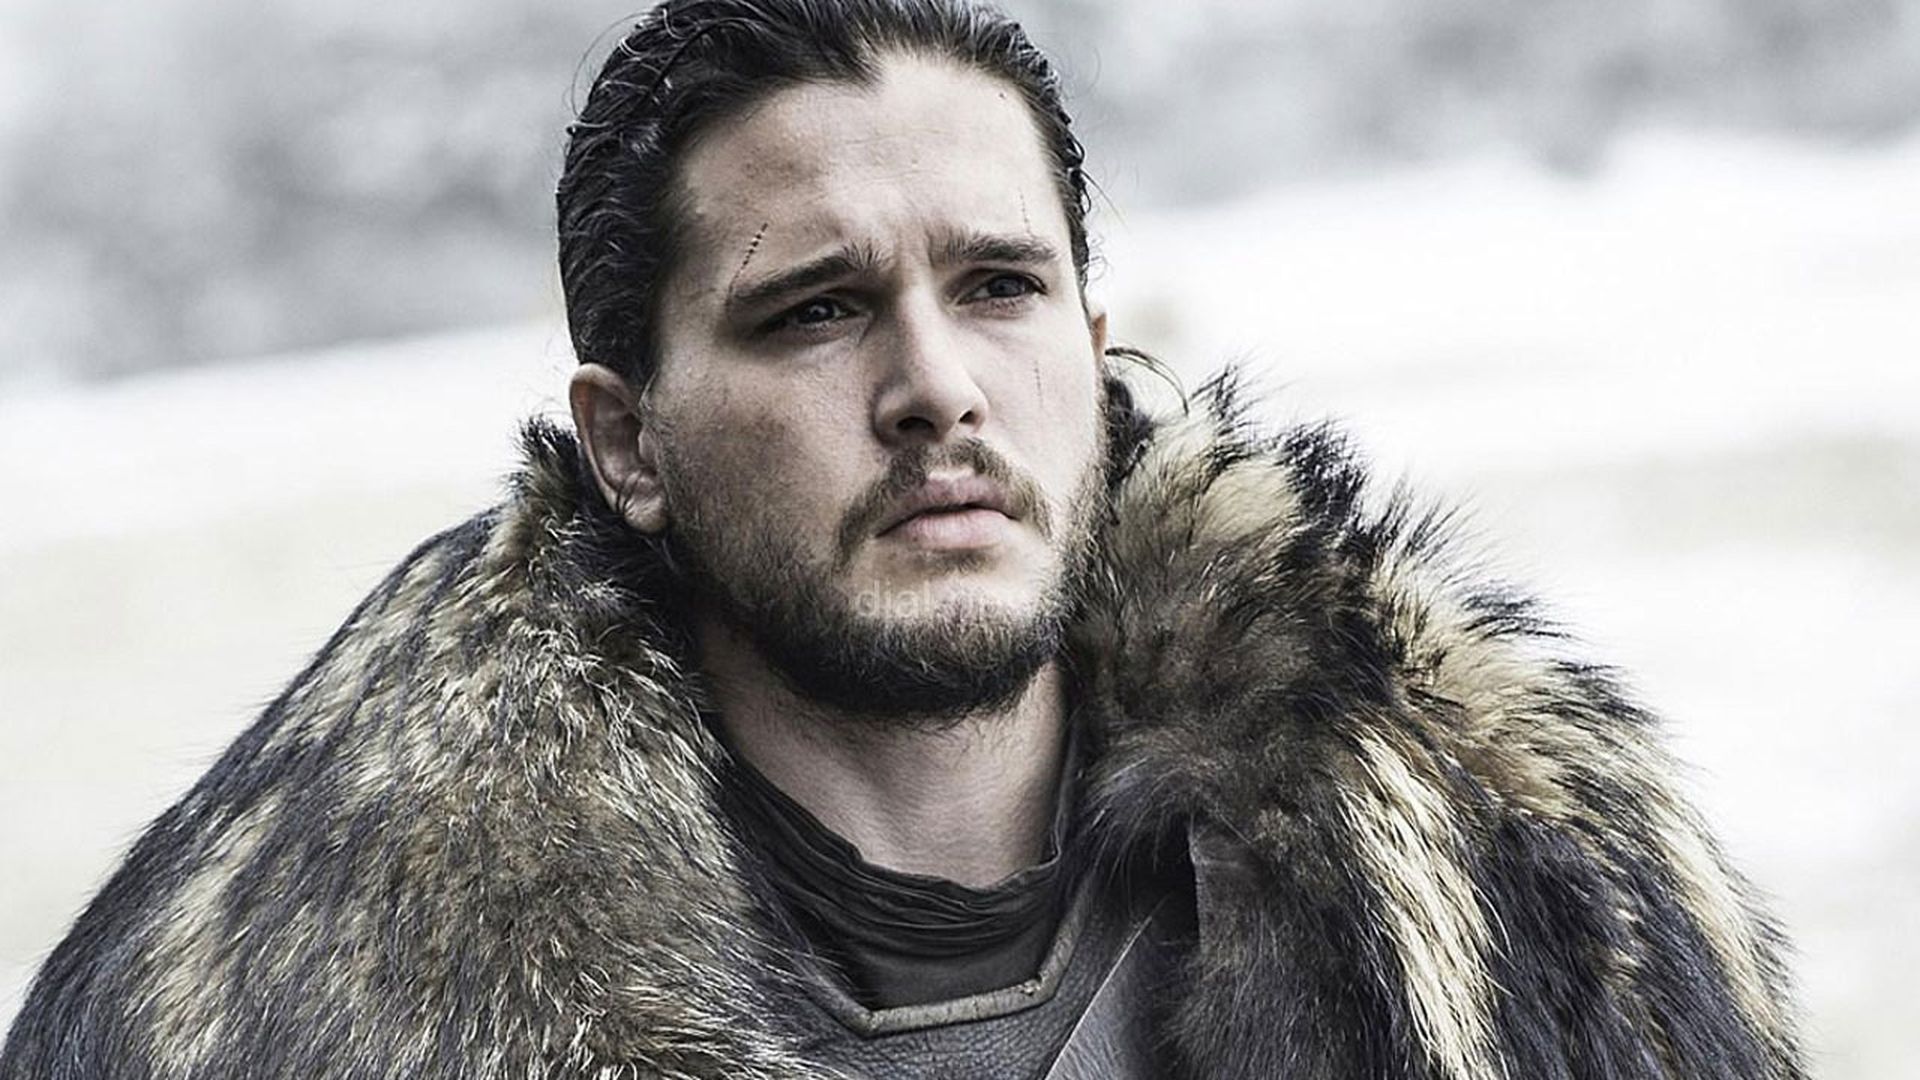 Many Game of Thrones sequel series are in the works, and according to reports, Jon Snow sequel series has begun early production with Kit Harington probably reprising his role.